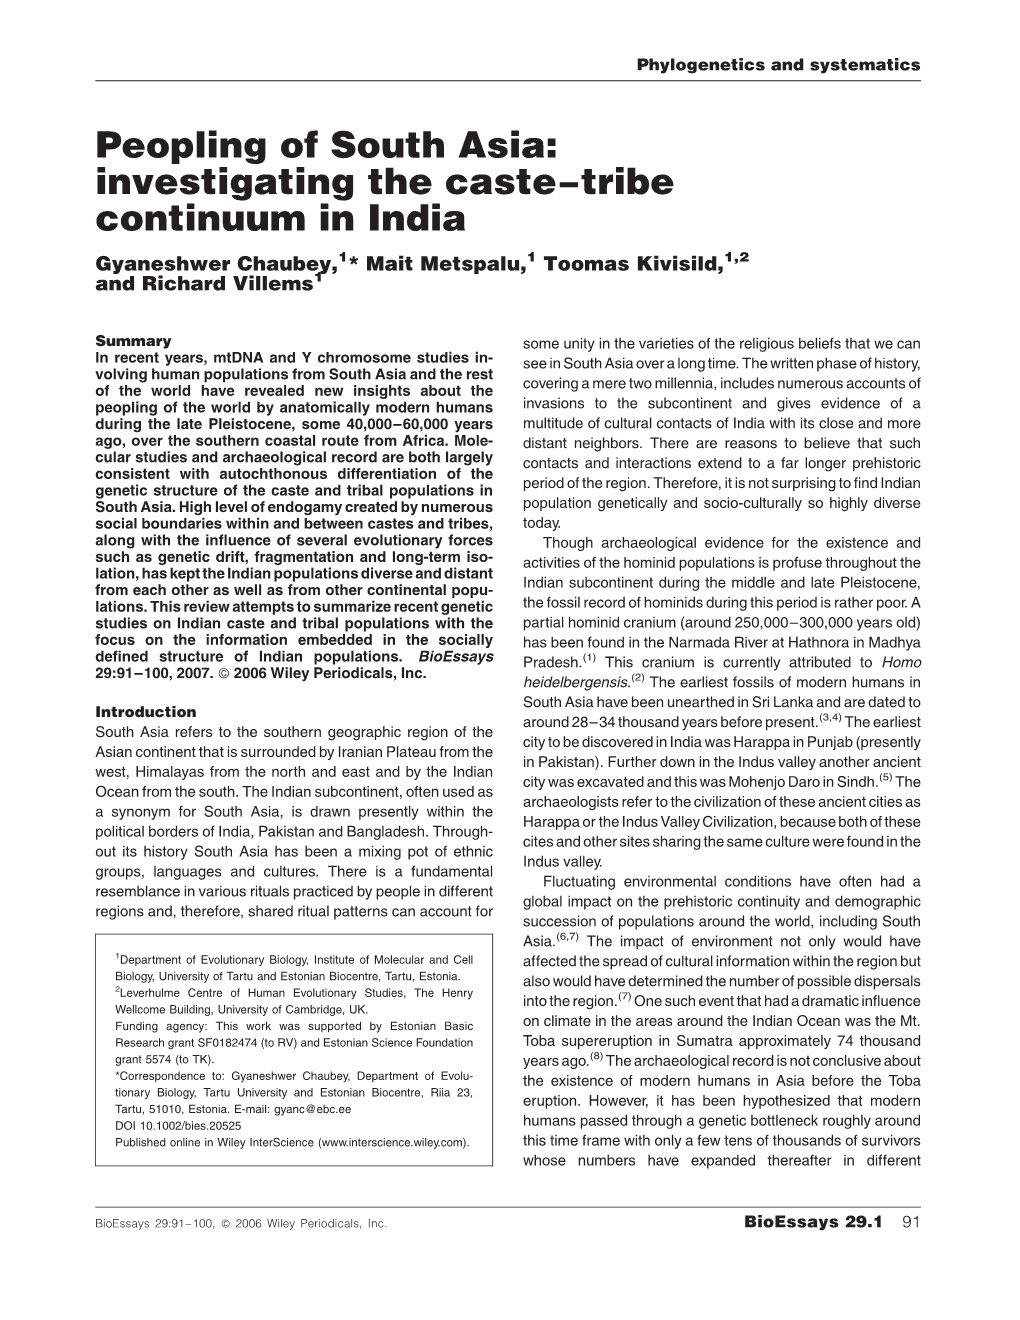 Peopling of South Asia: Investigating the Caste-Tribe Continuum in India